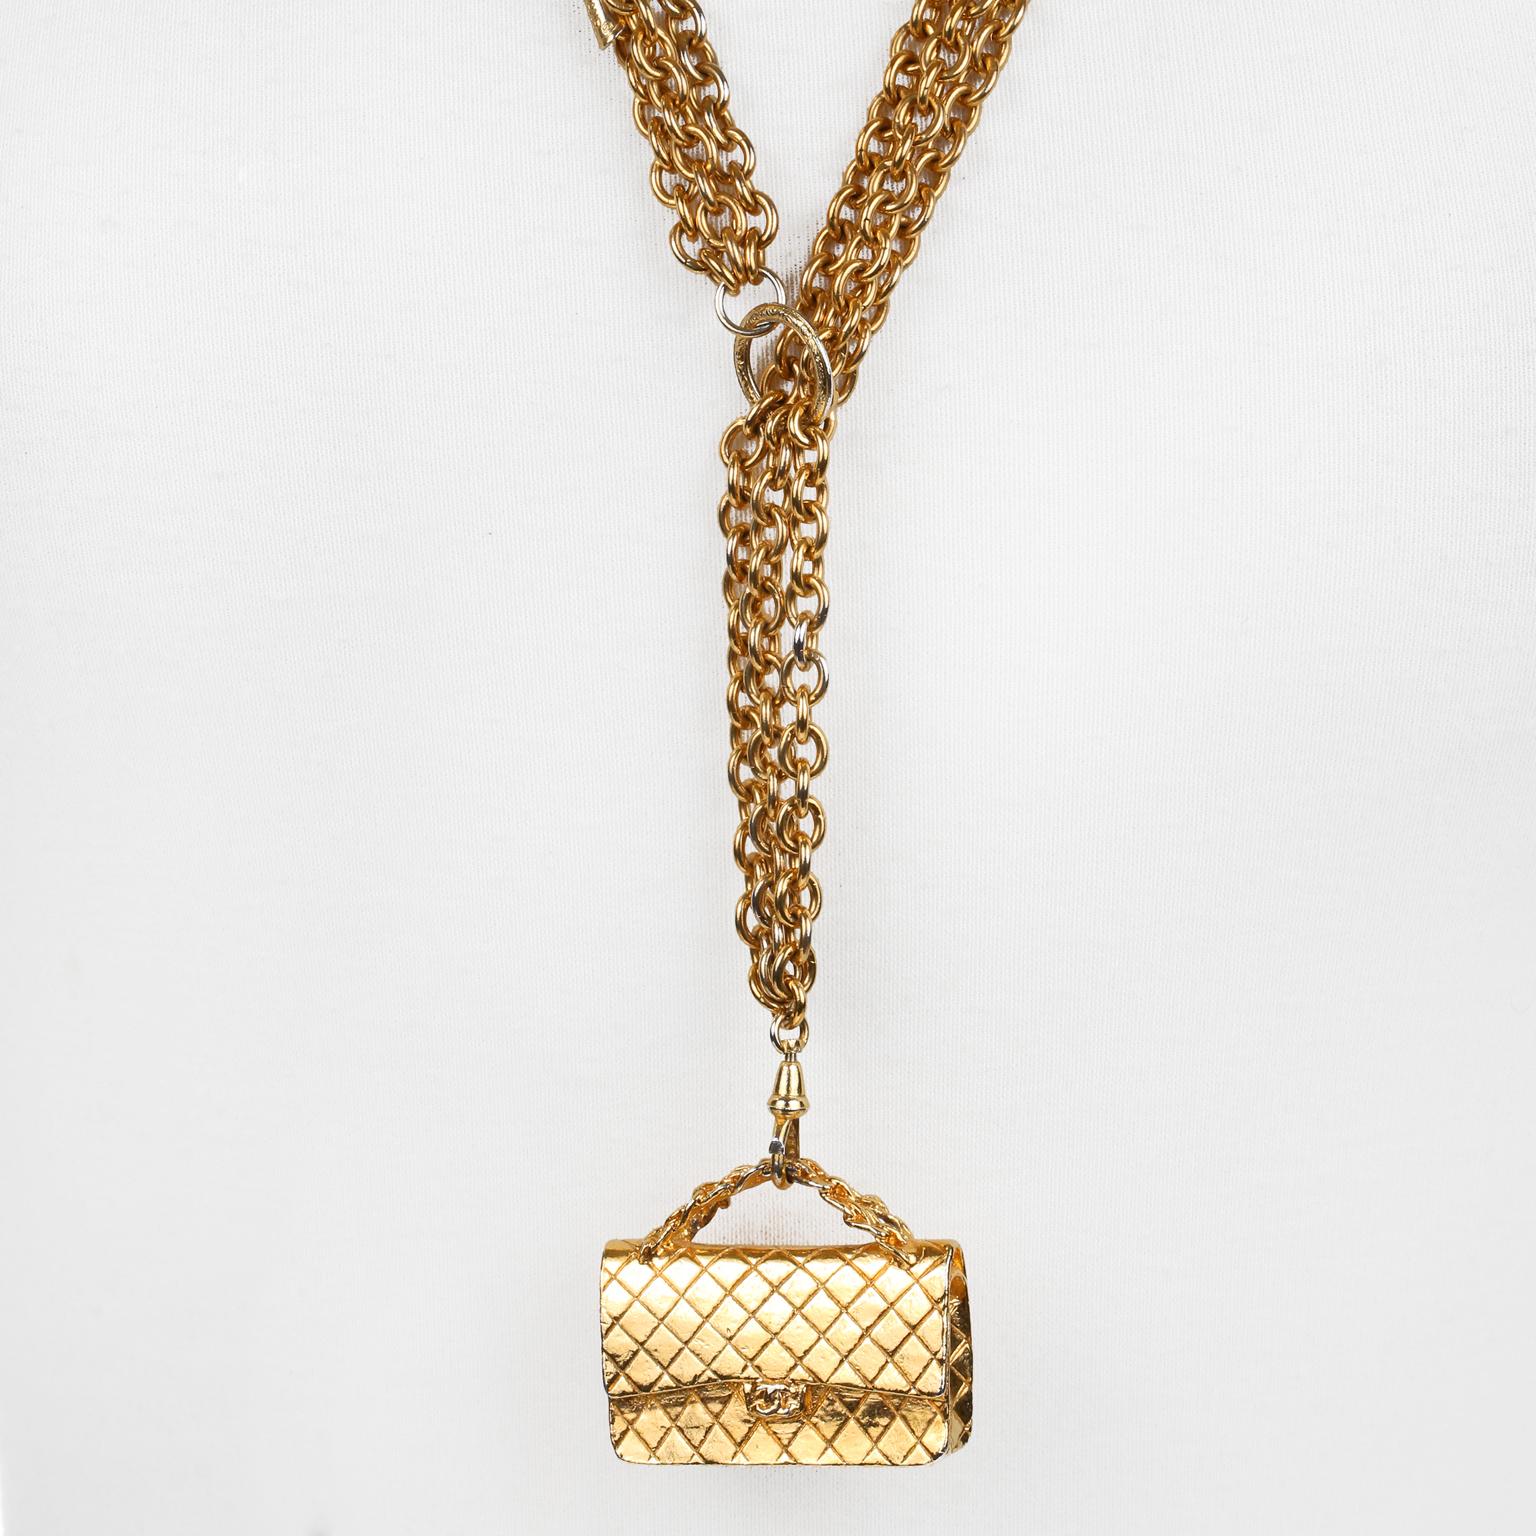 This authentic Chanel Gold Flap Bag Sautoir Necklace is in excellent vintage condition from the 1980's.  This chic and versatile piece is a great addition to any collection.
Long triple chain necklace in lariat style is anchored by an iconic Chanel